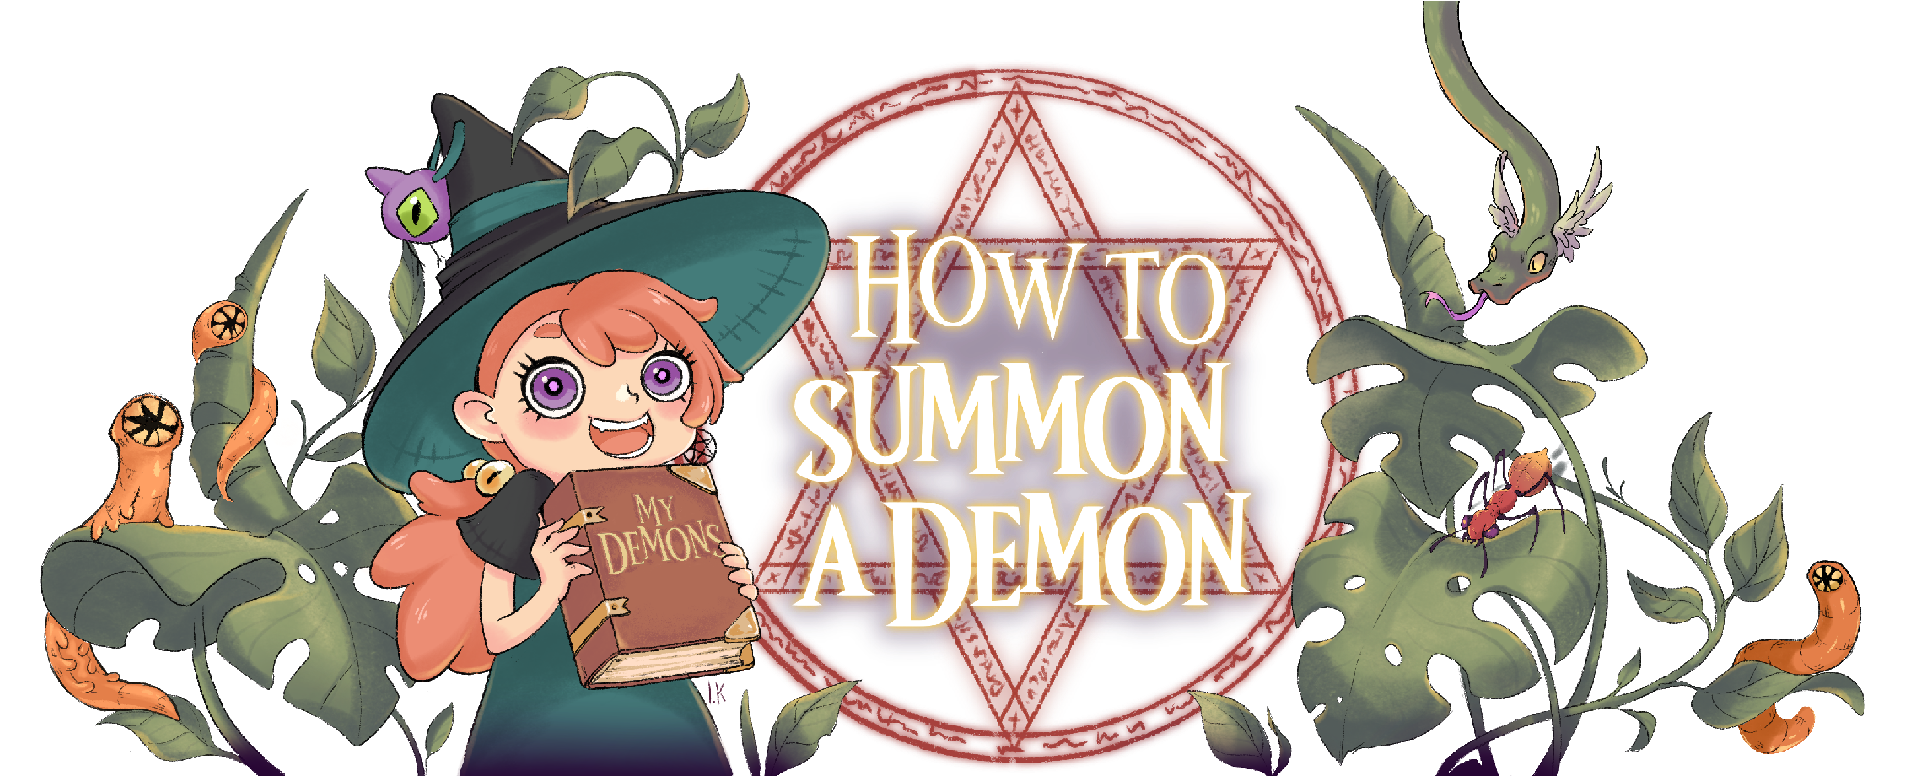 How to summon a Demon